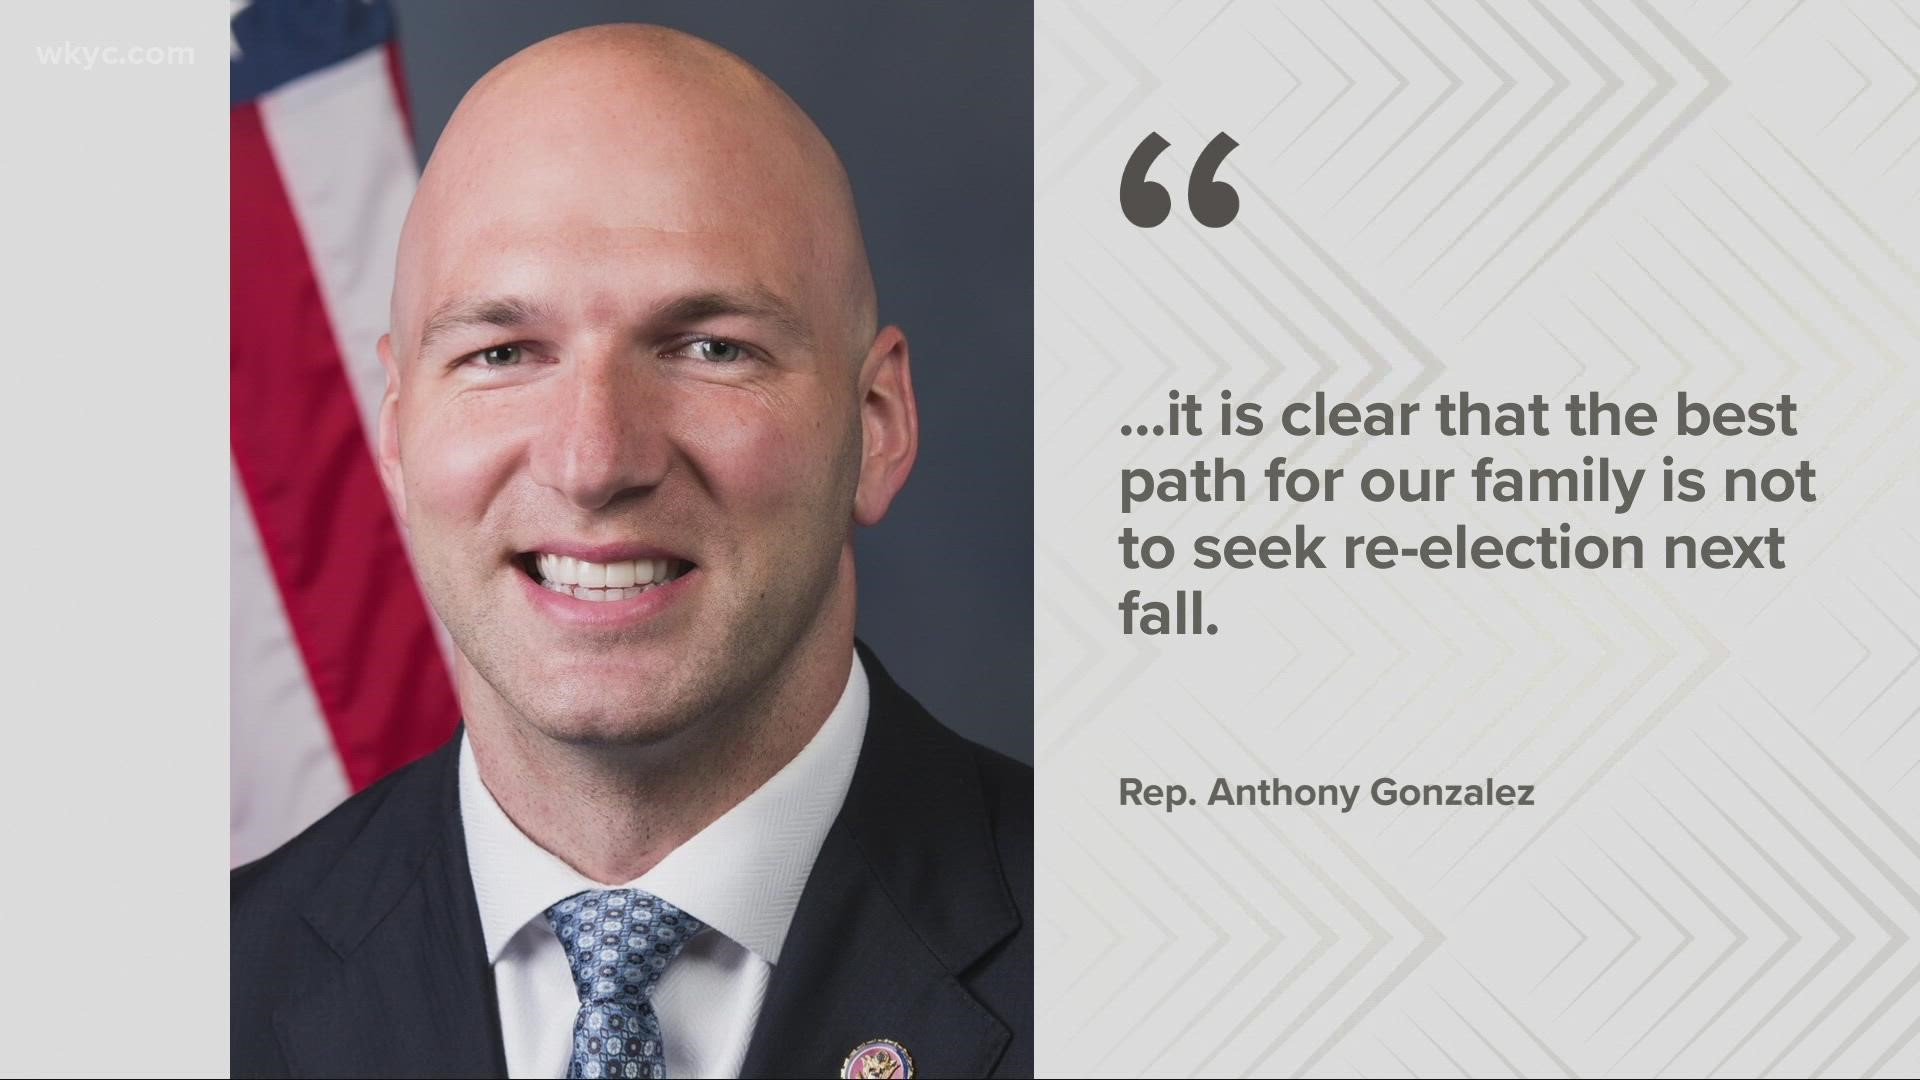 Ohio Republican Anthony Gonzalez announced late Thursday evening that he will not seek reelection in 2022. Gonzalez cited his family and gridlock in Washington DC.